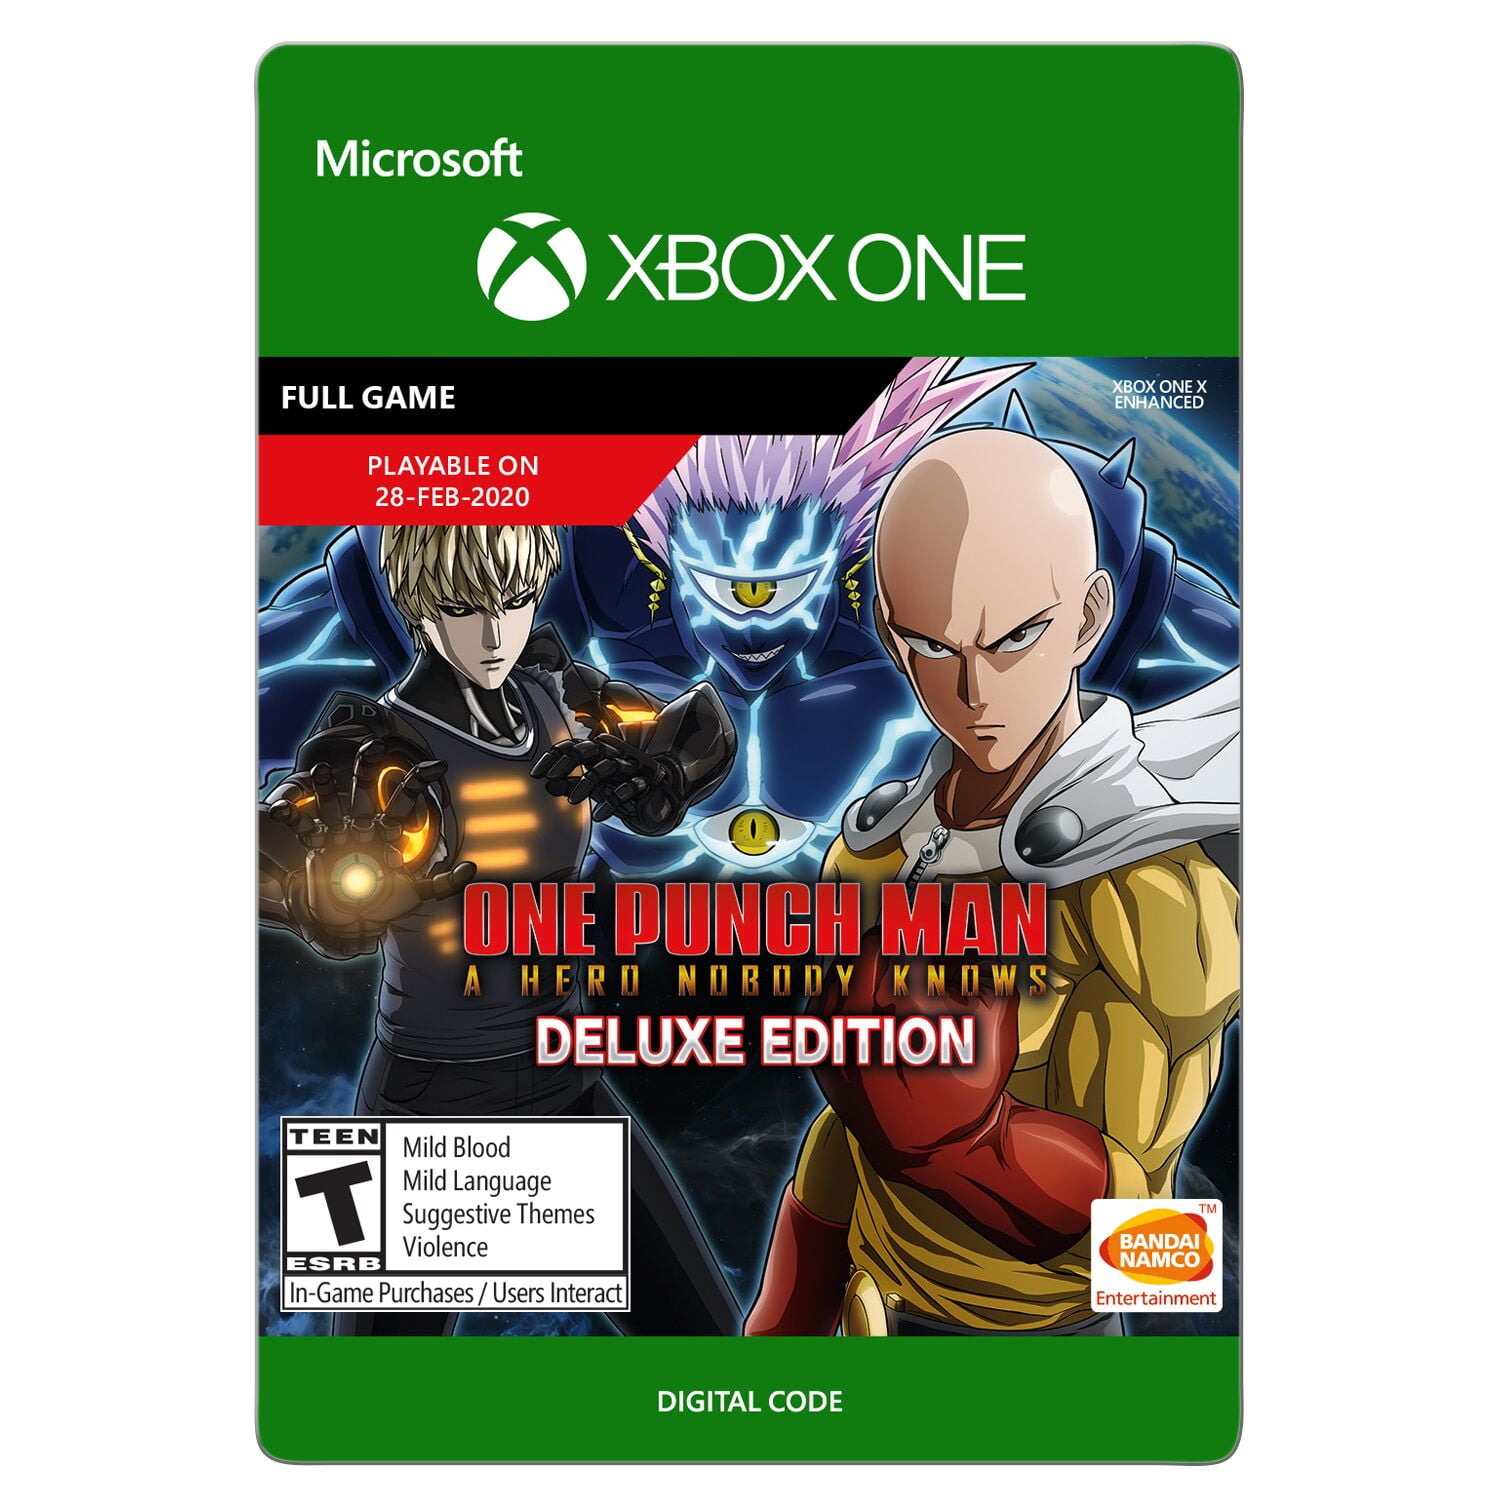 One Punch Man A Hero Nobody Knows Deluxe Edition Bandai Namco